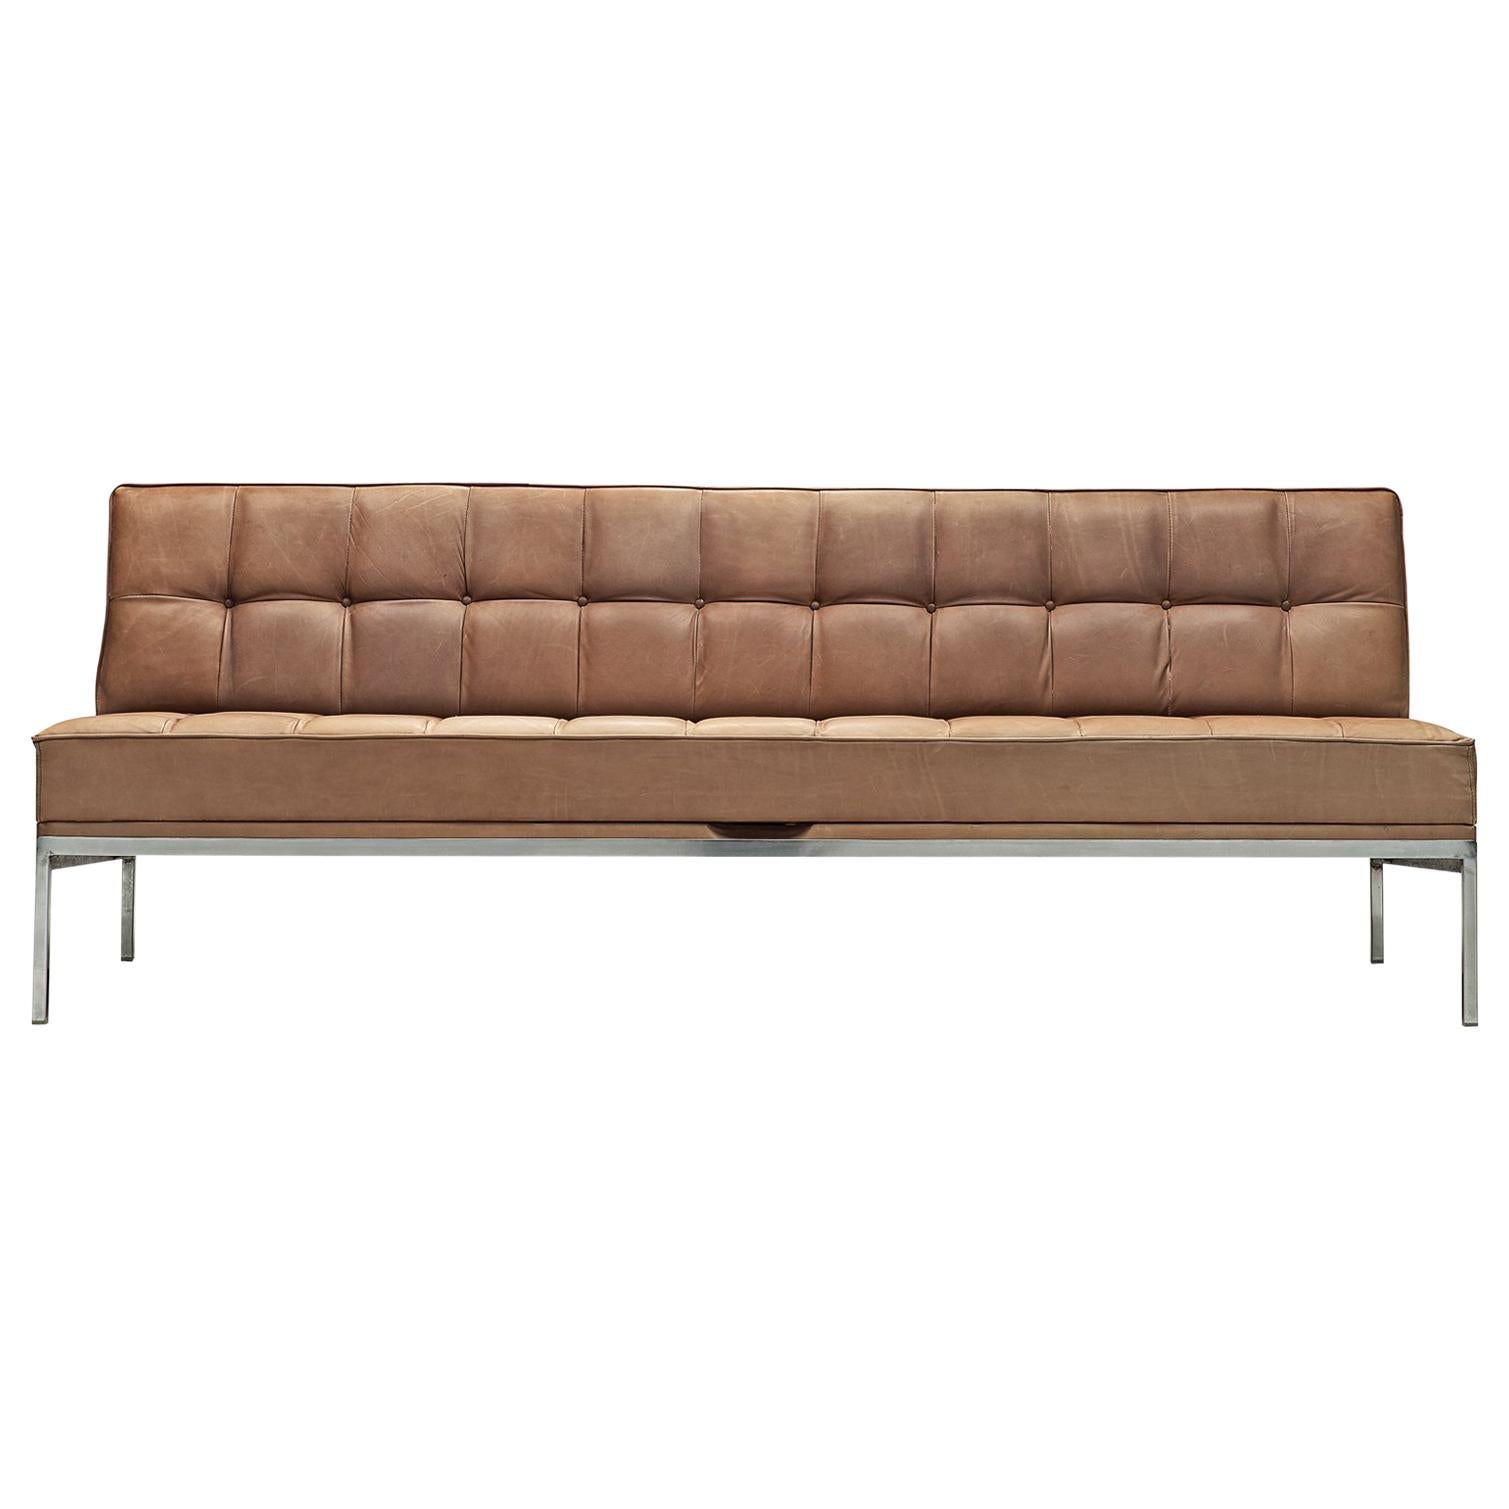 Johannes Spalt 'Constanze' Sofa in Taupe Leather